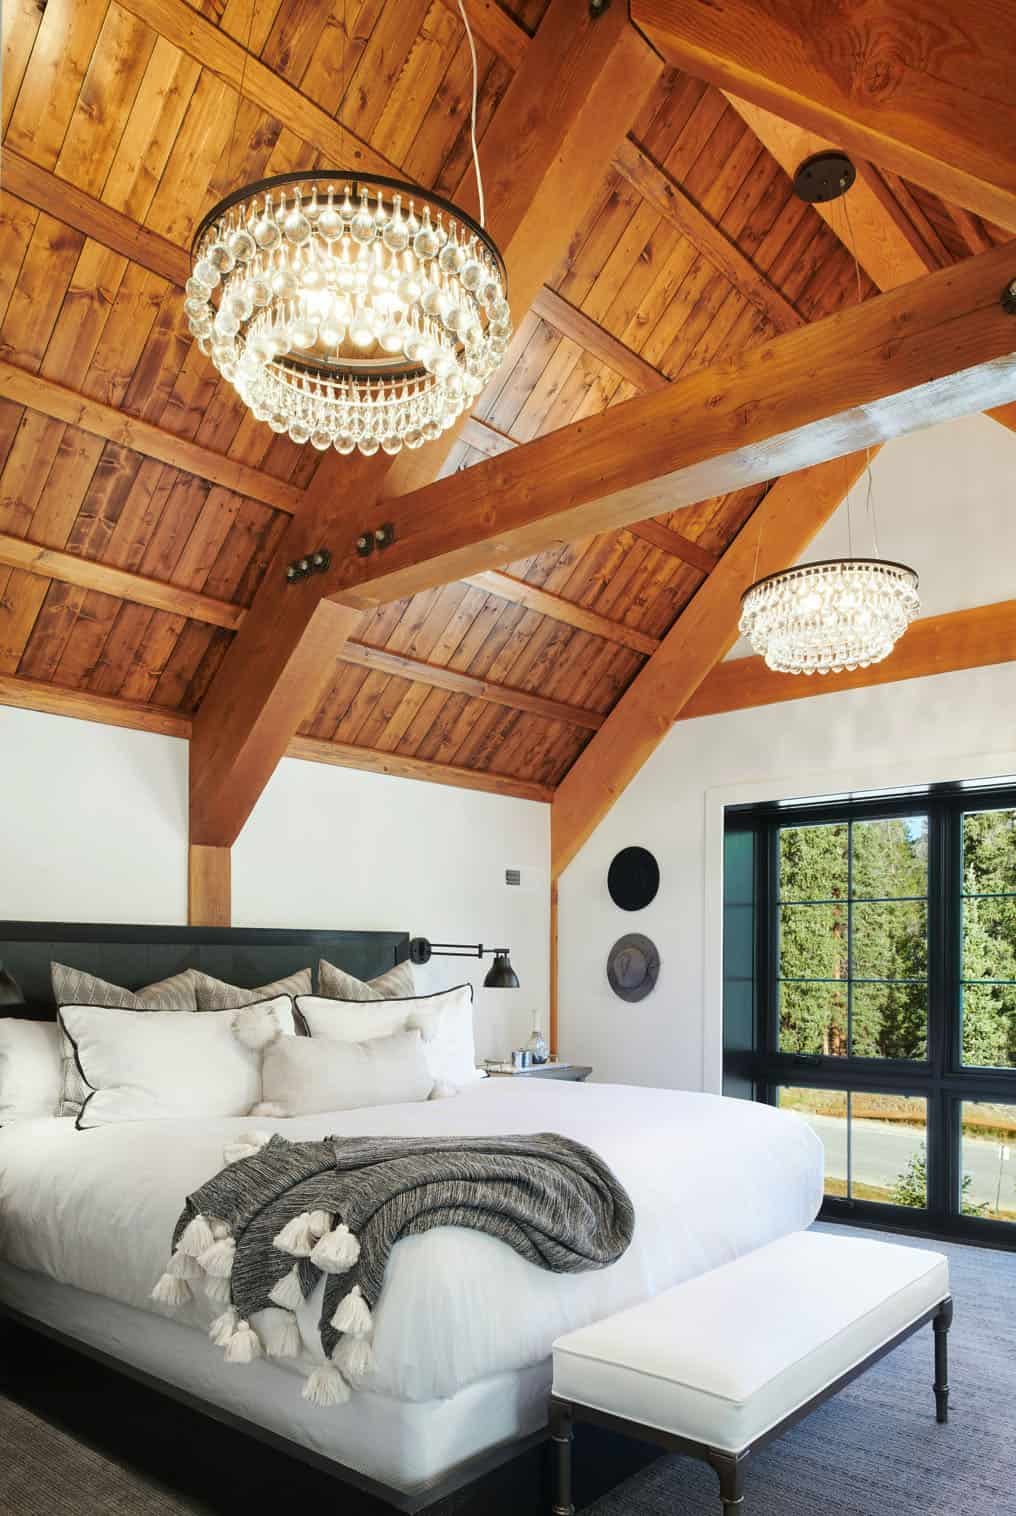 The bedroom features a slanted ceiling accent with crystal chandeliers and cool views